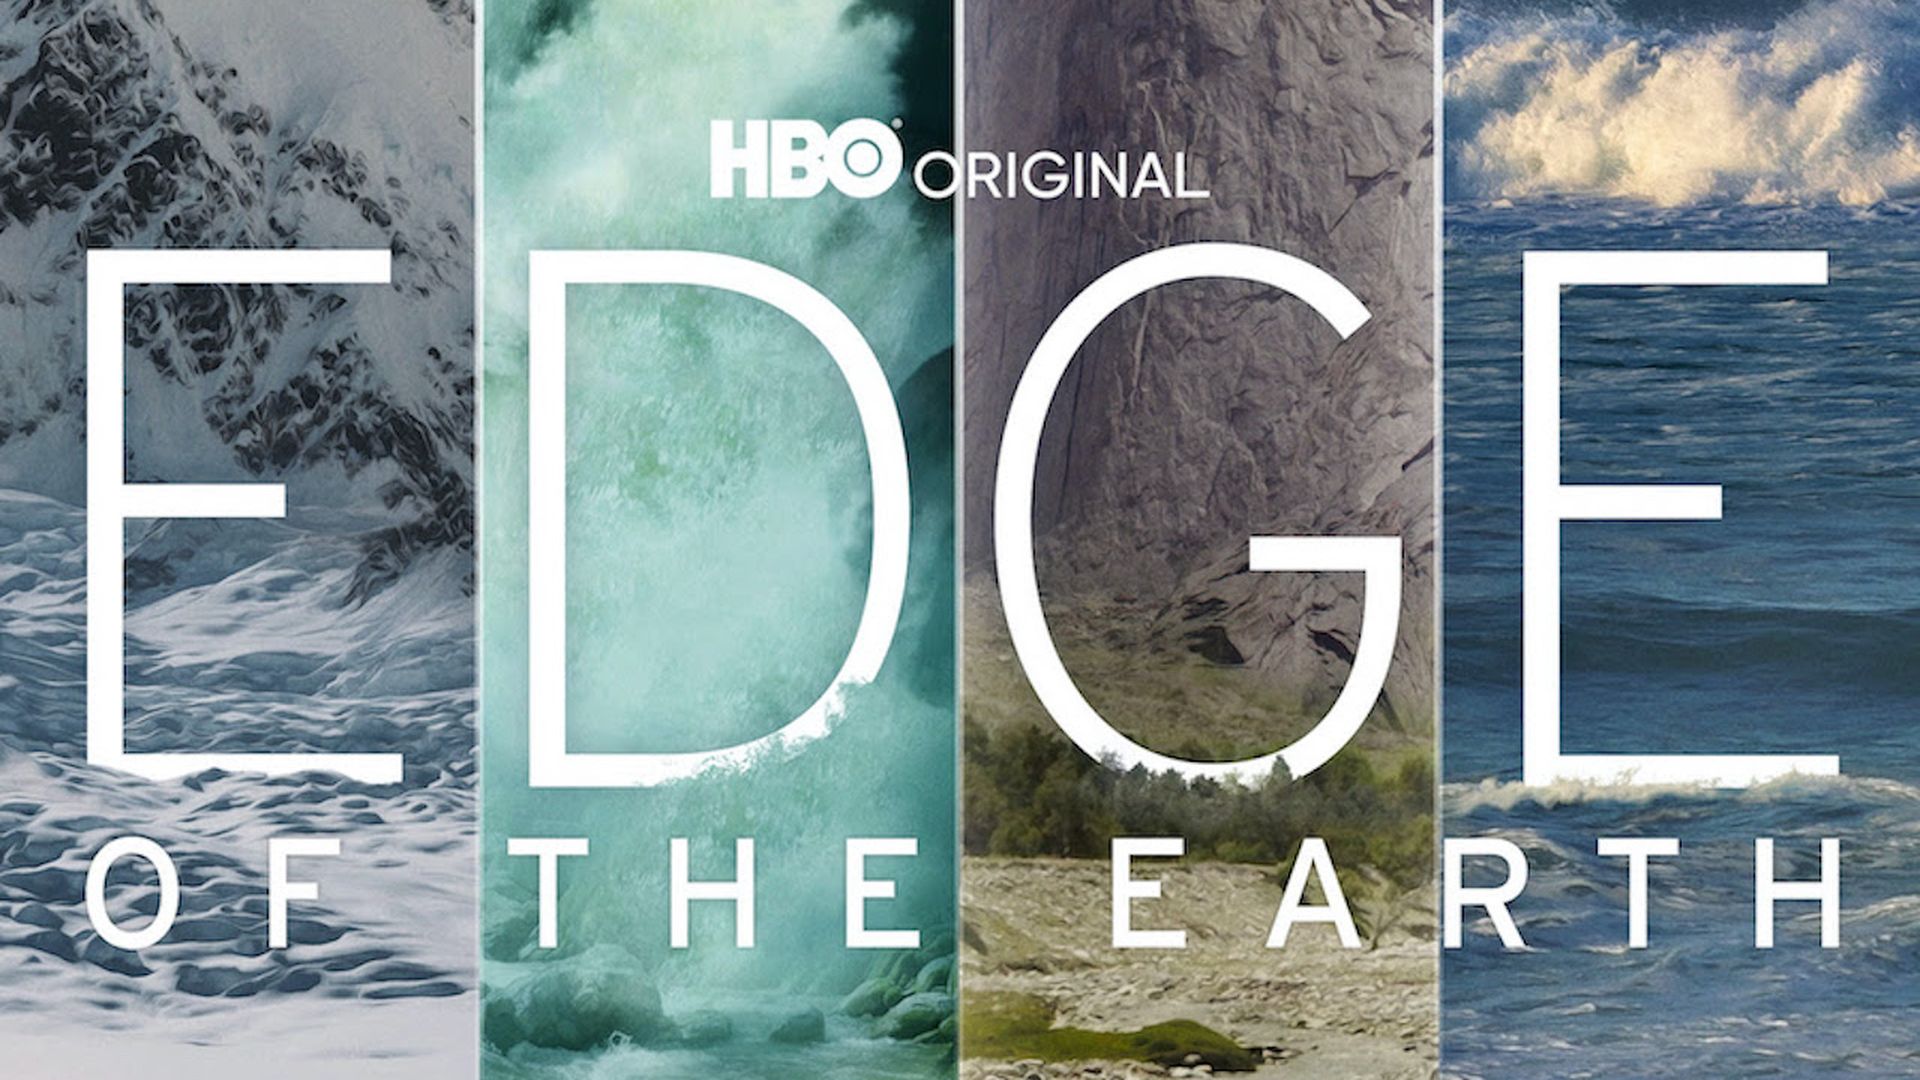 HBO graphic